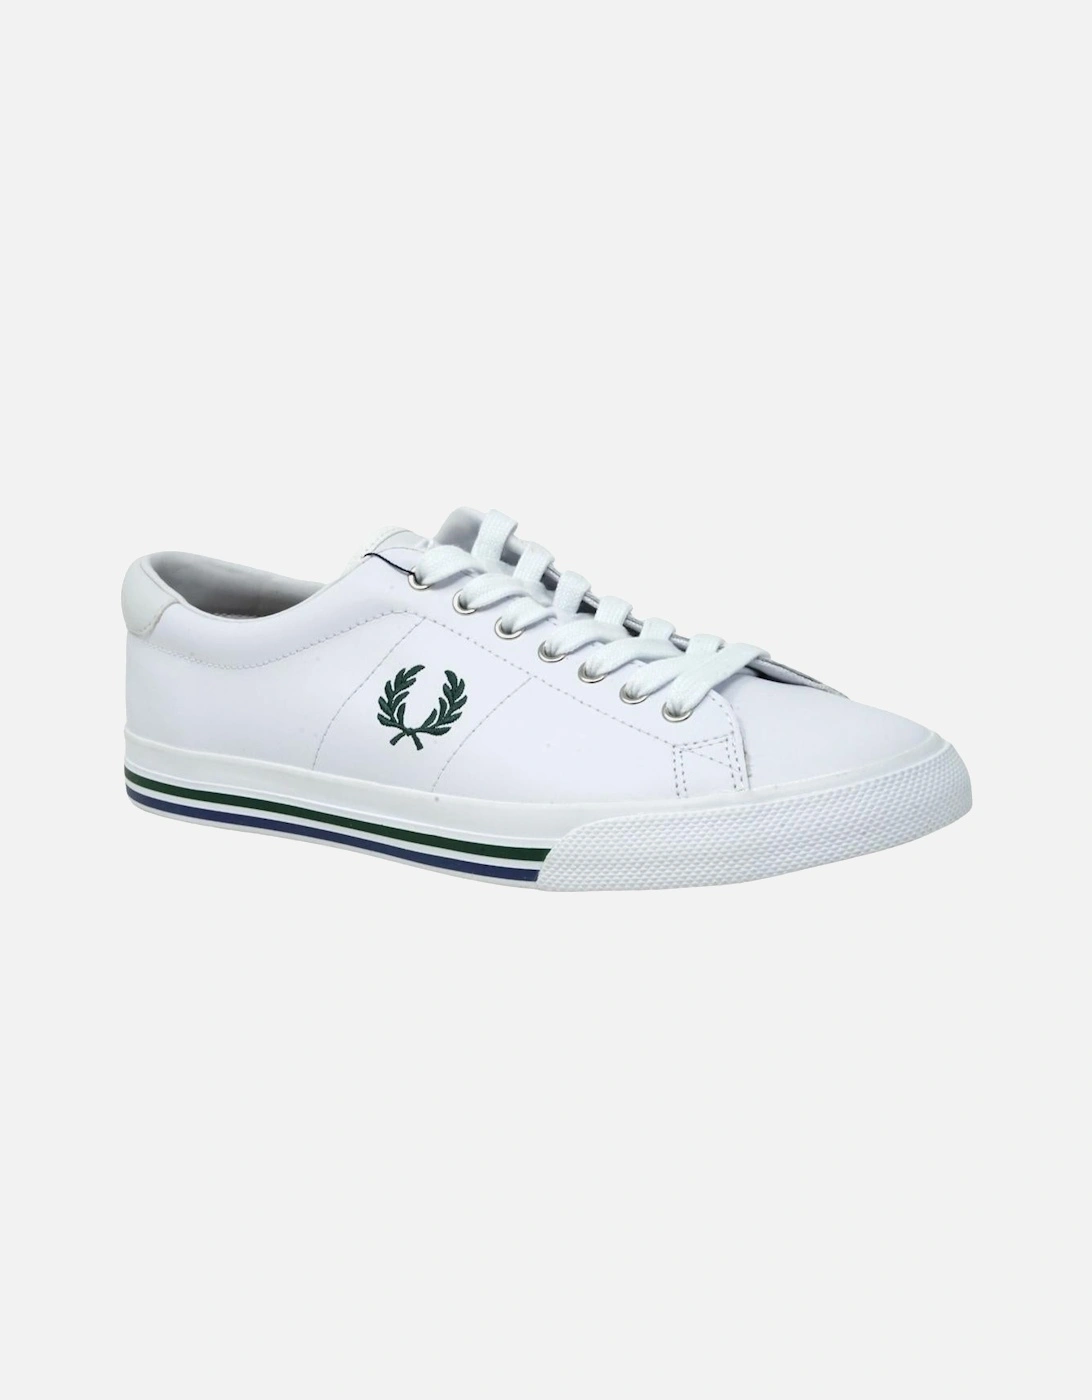 Underspin Leather B9200 183 White Trainers